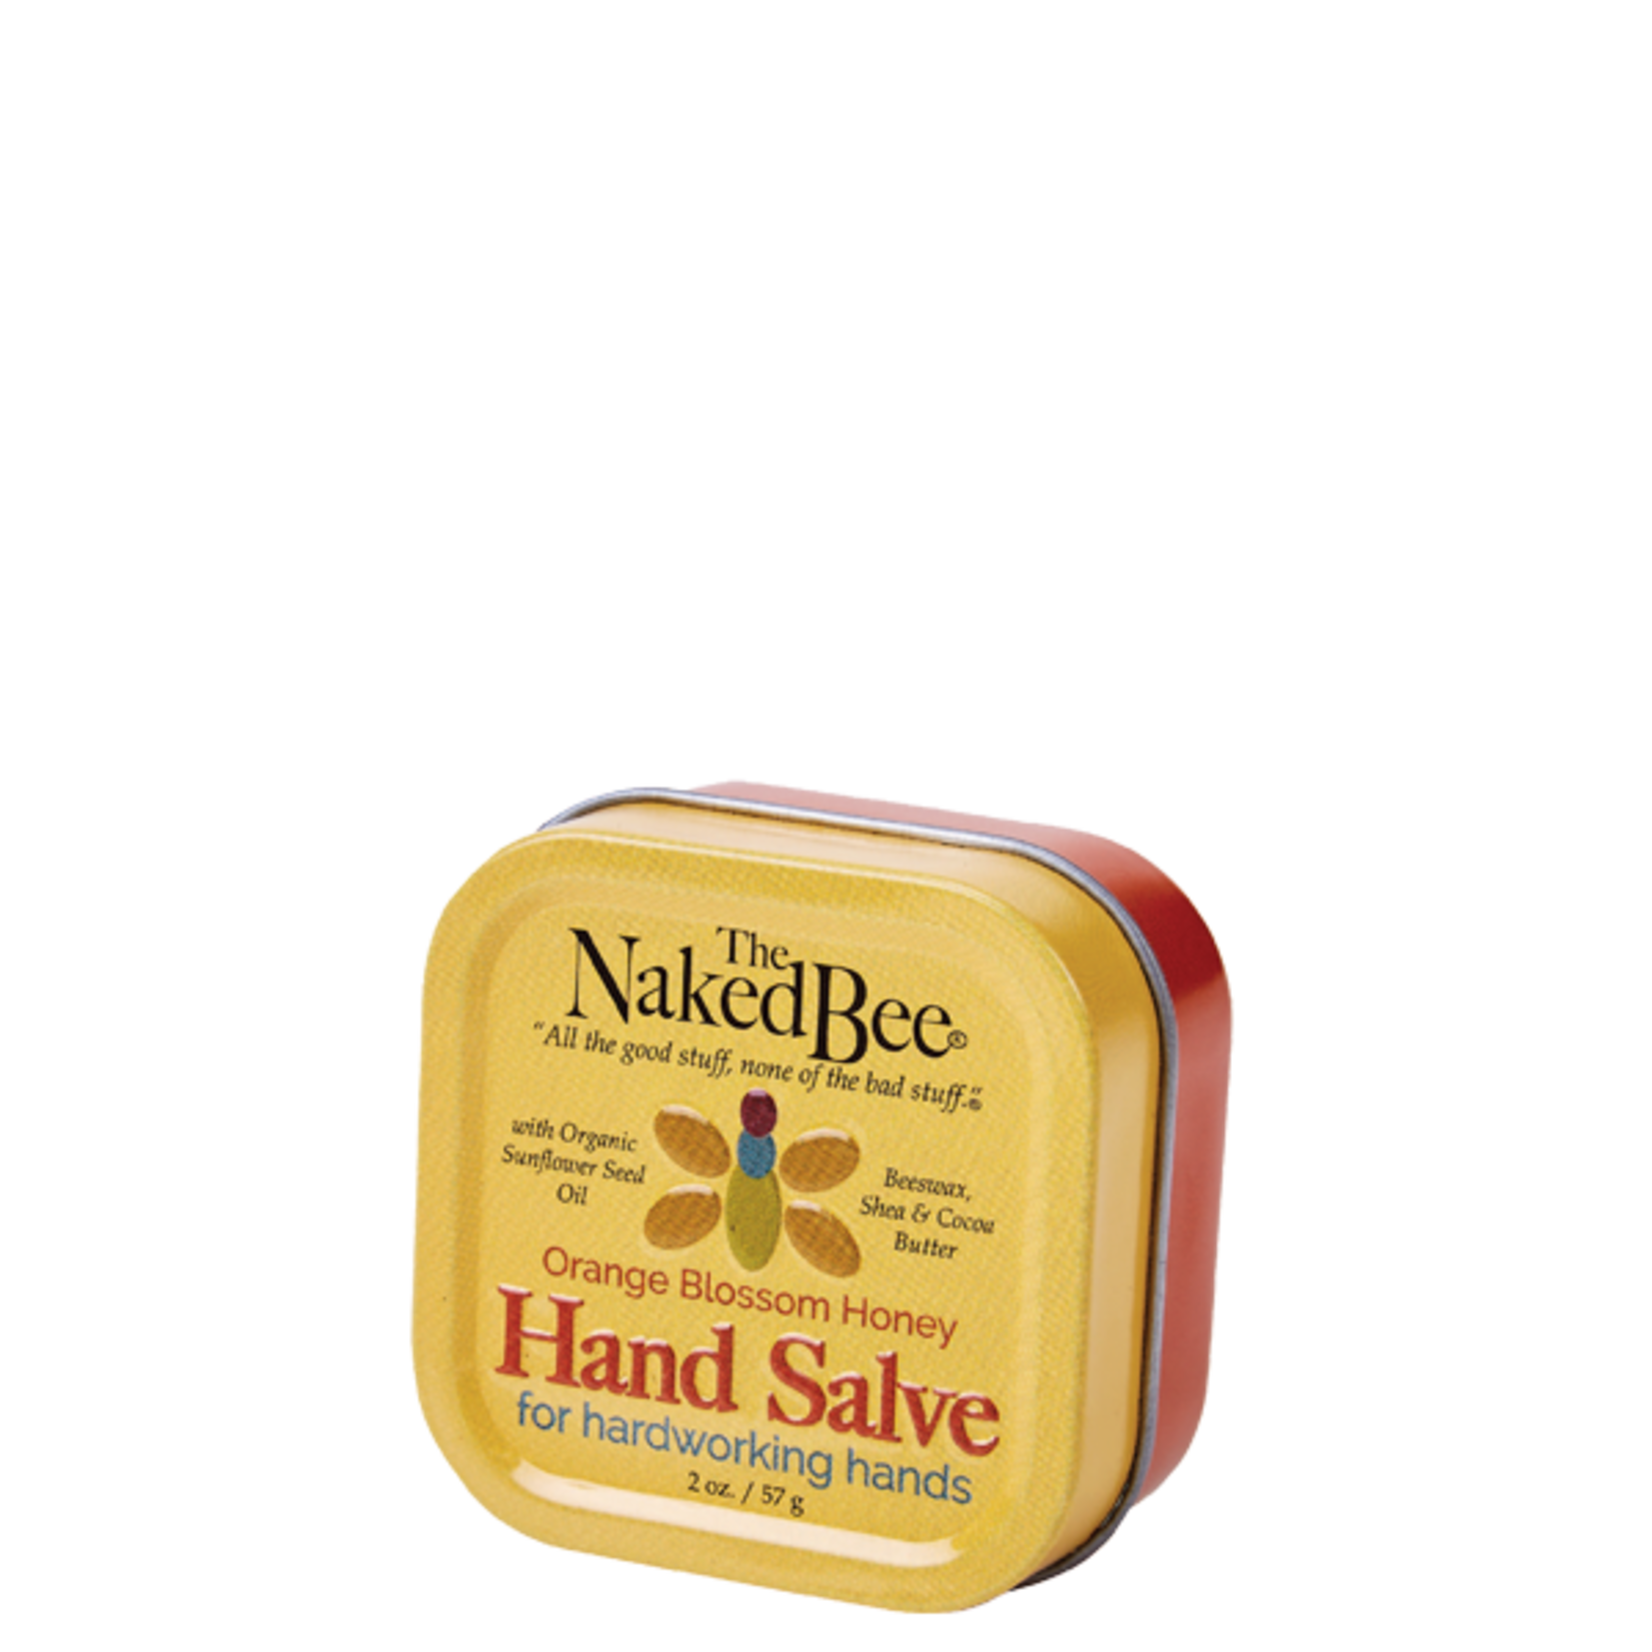 The Naked Bee The Naked Bee Hand Salve